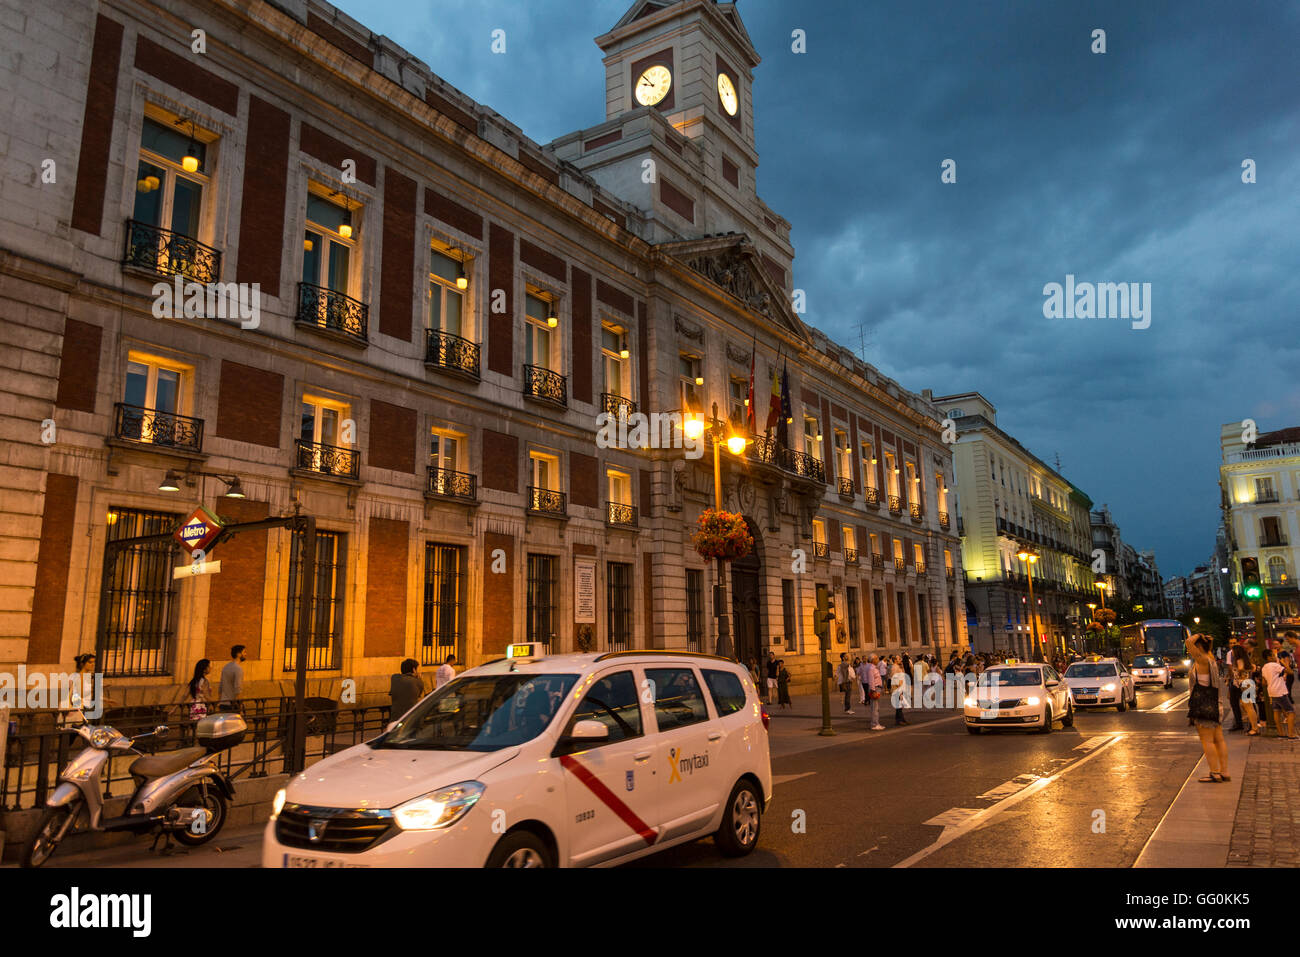 Old Royal Post Office building now the regional government office, Puerta del Sol, Madrid, Spain Stock Photo